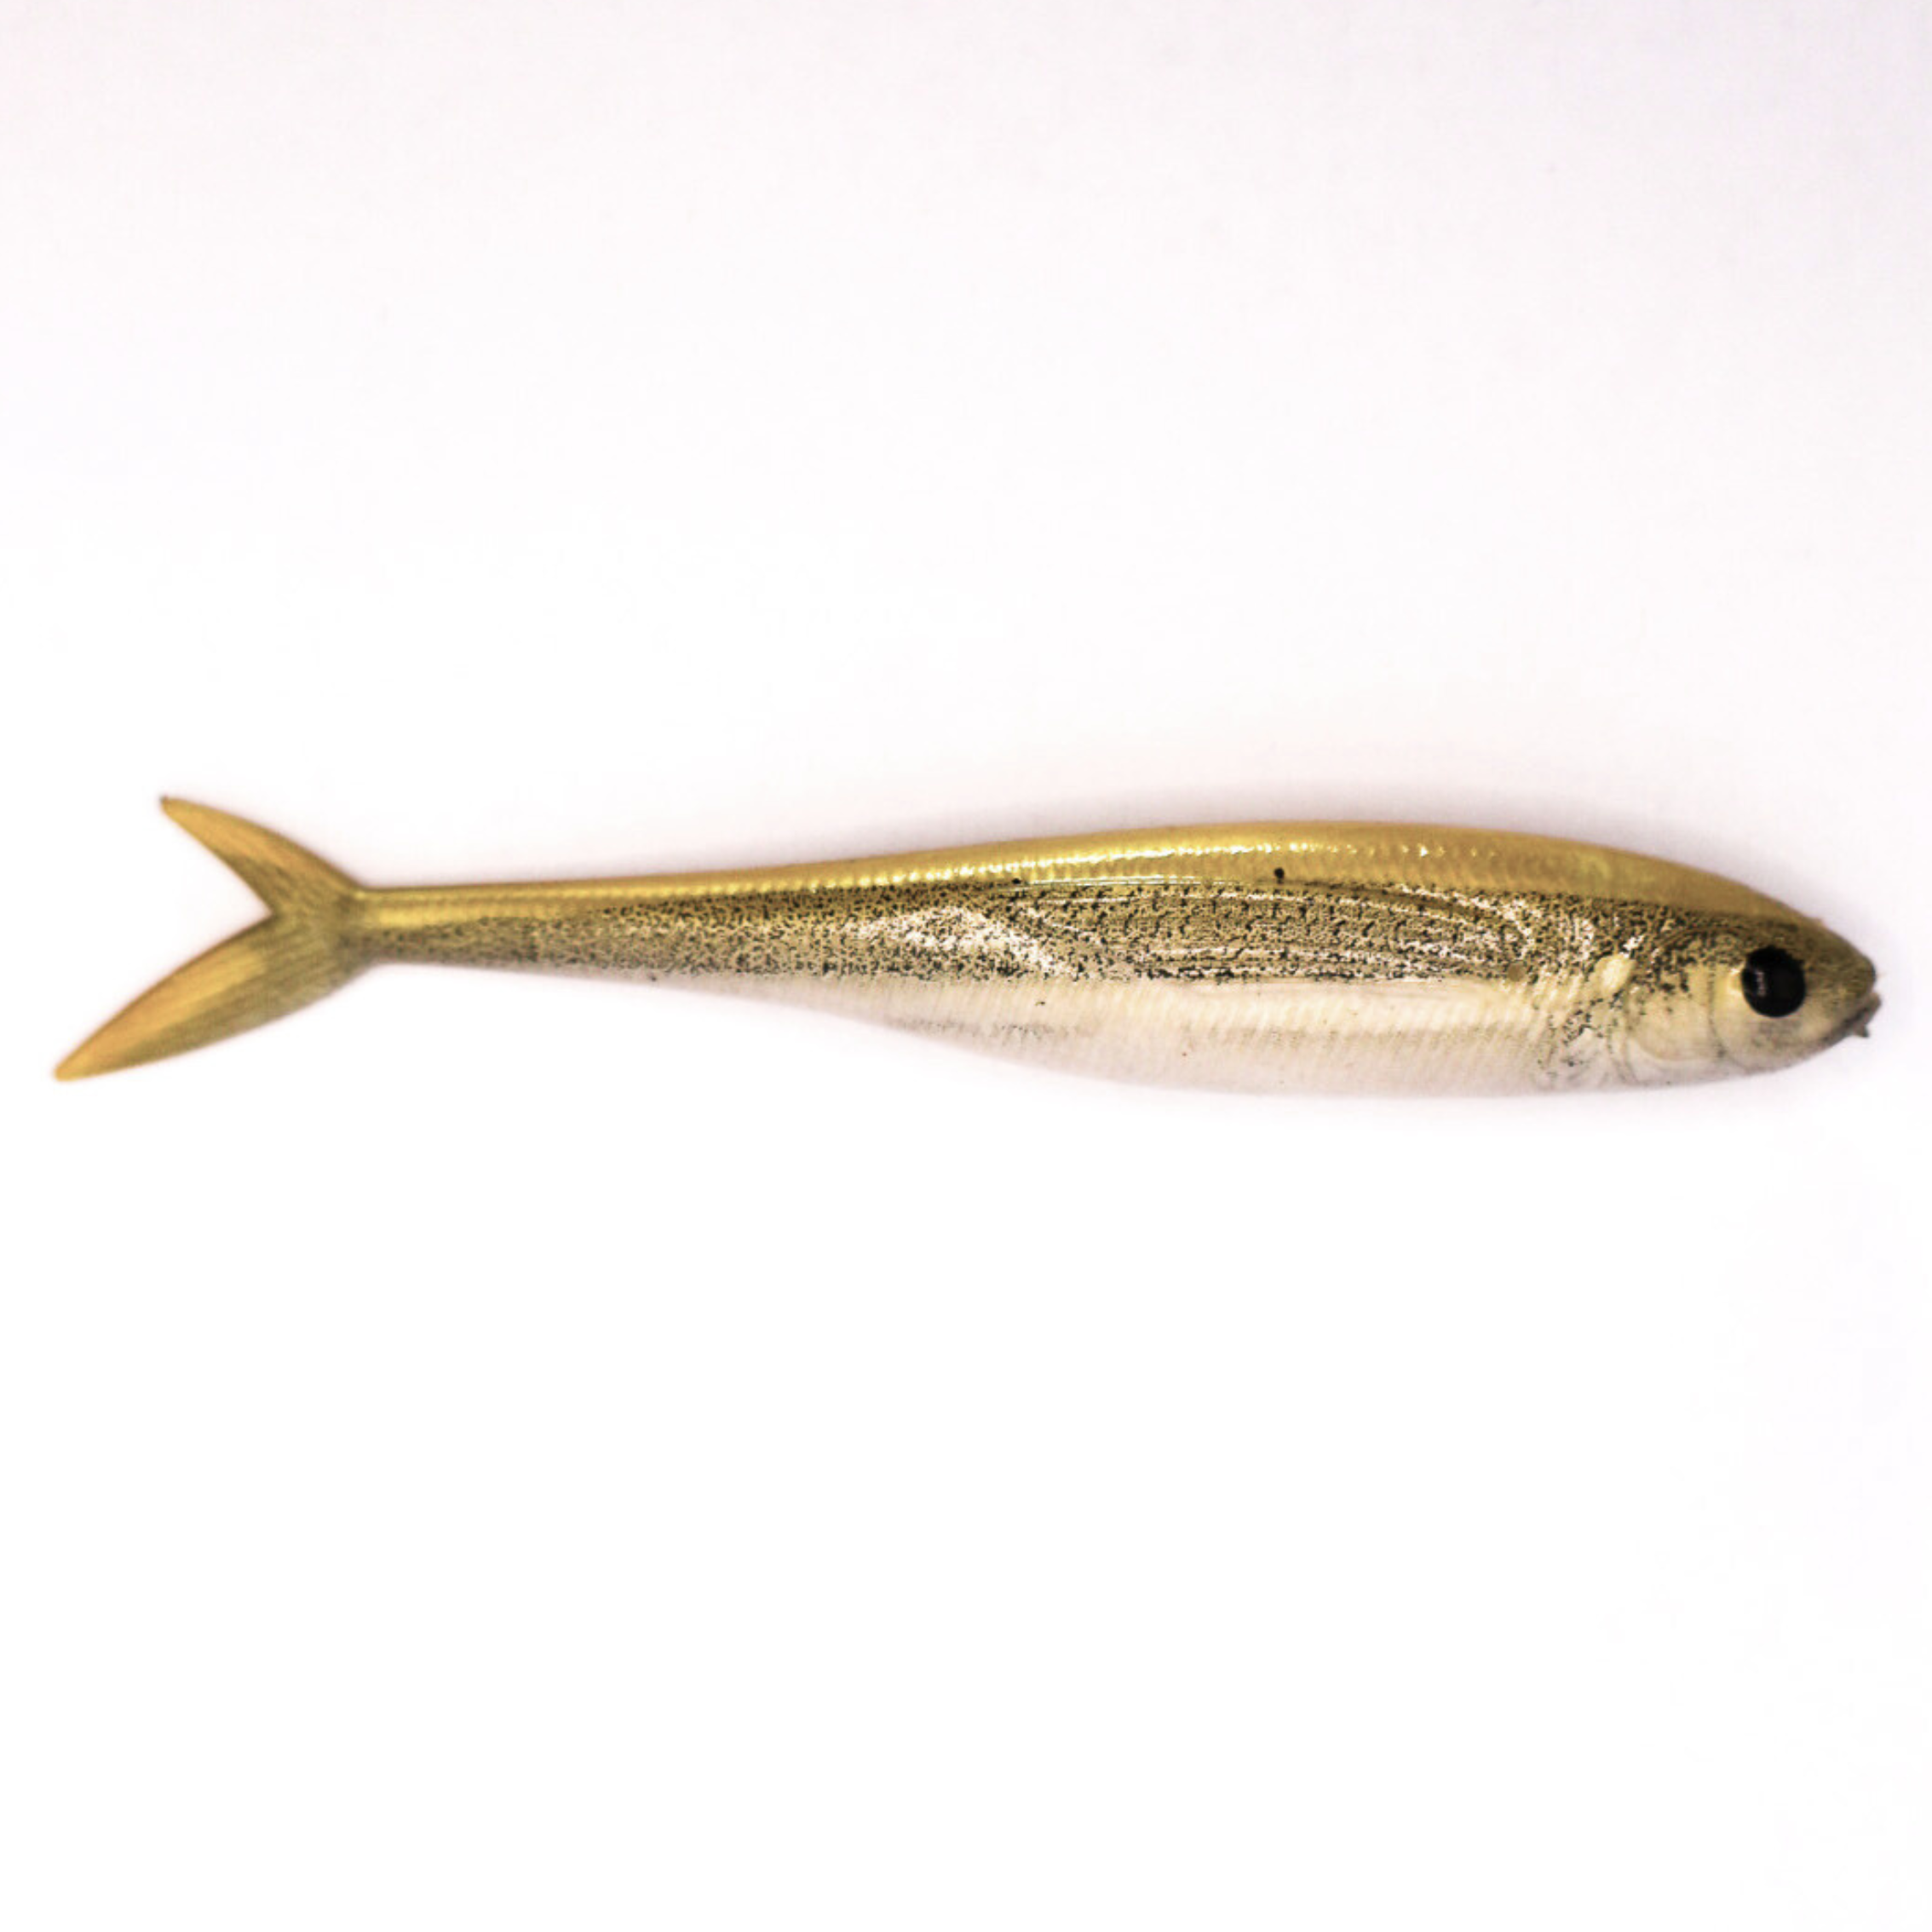 White Bait Fish Tail Minnow 4 Inch Tackle, 3 Pcs